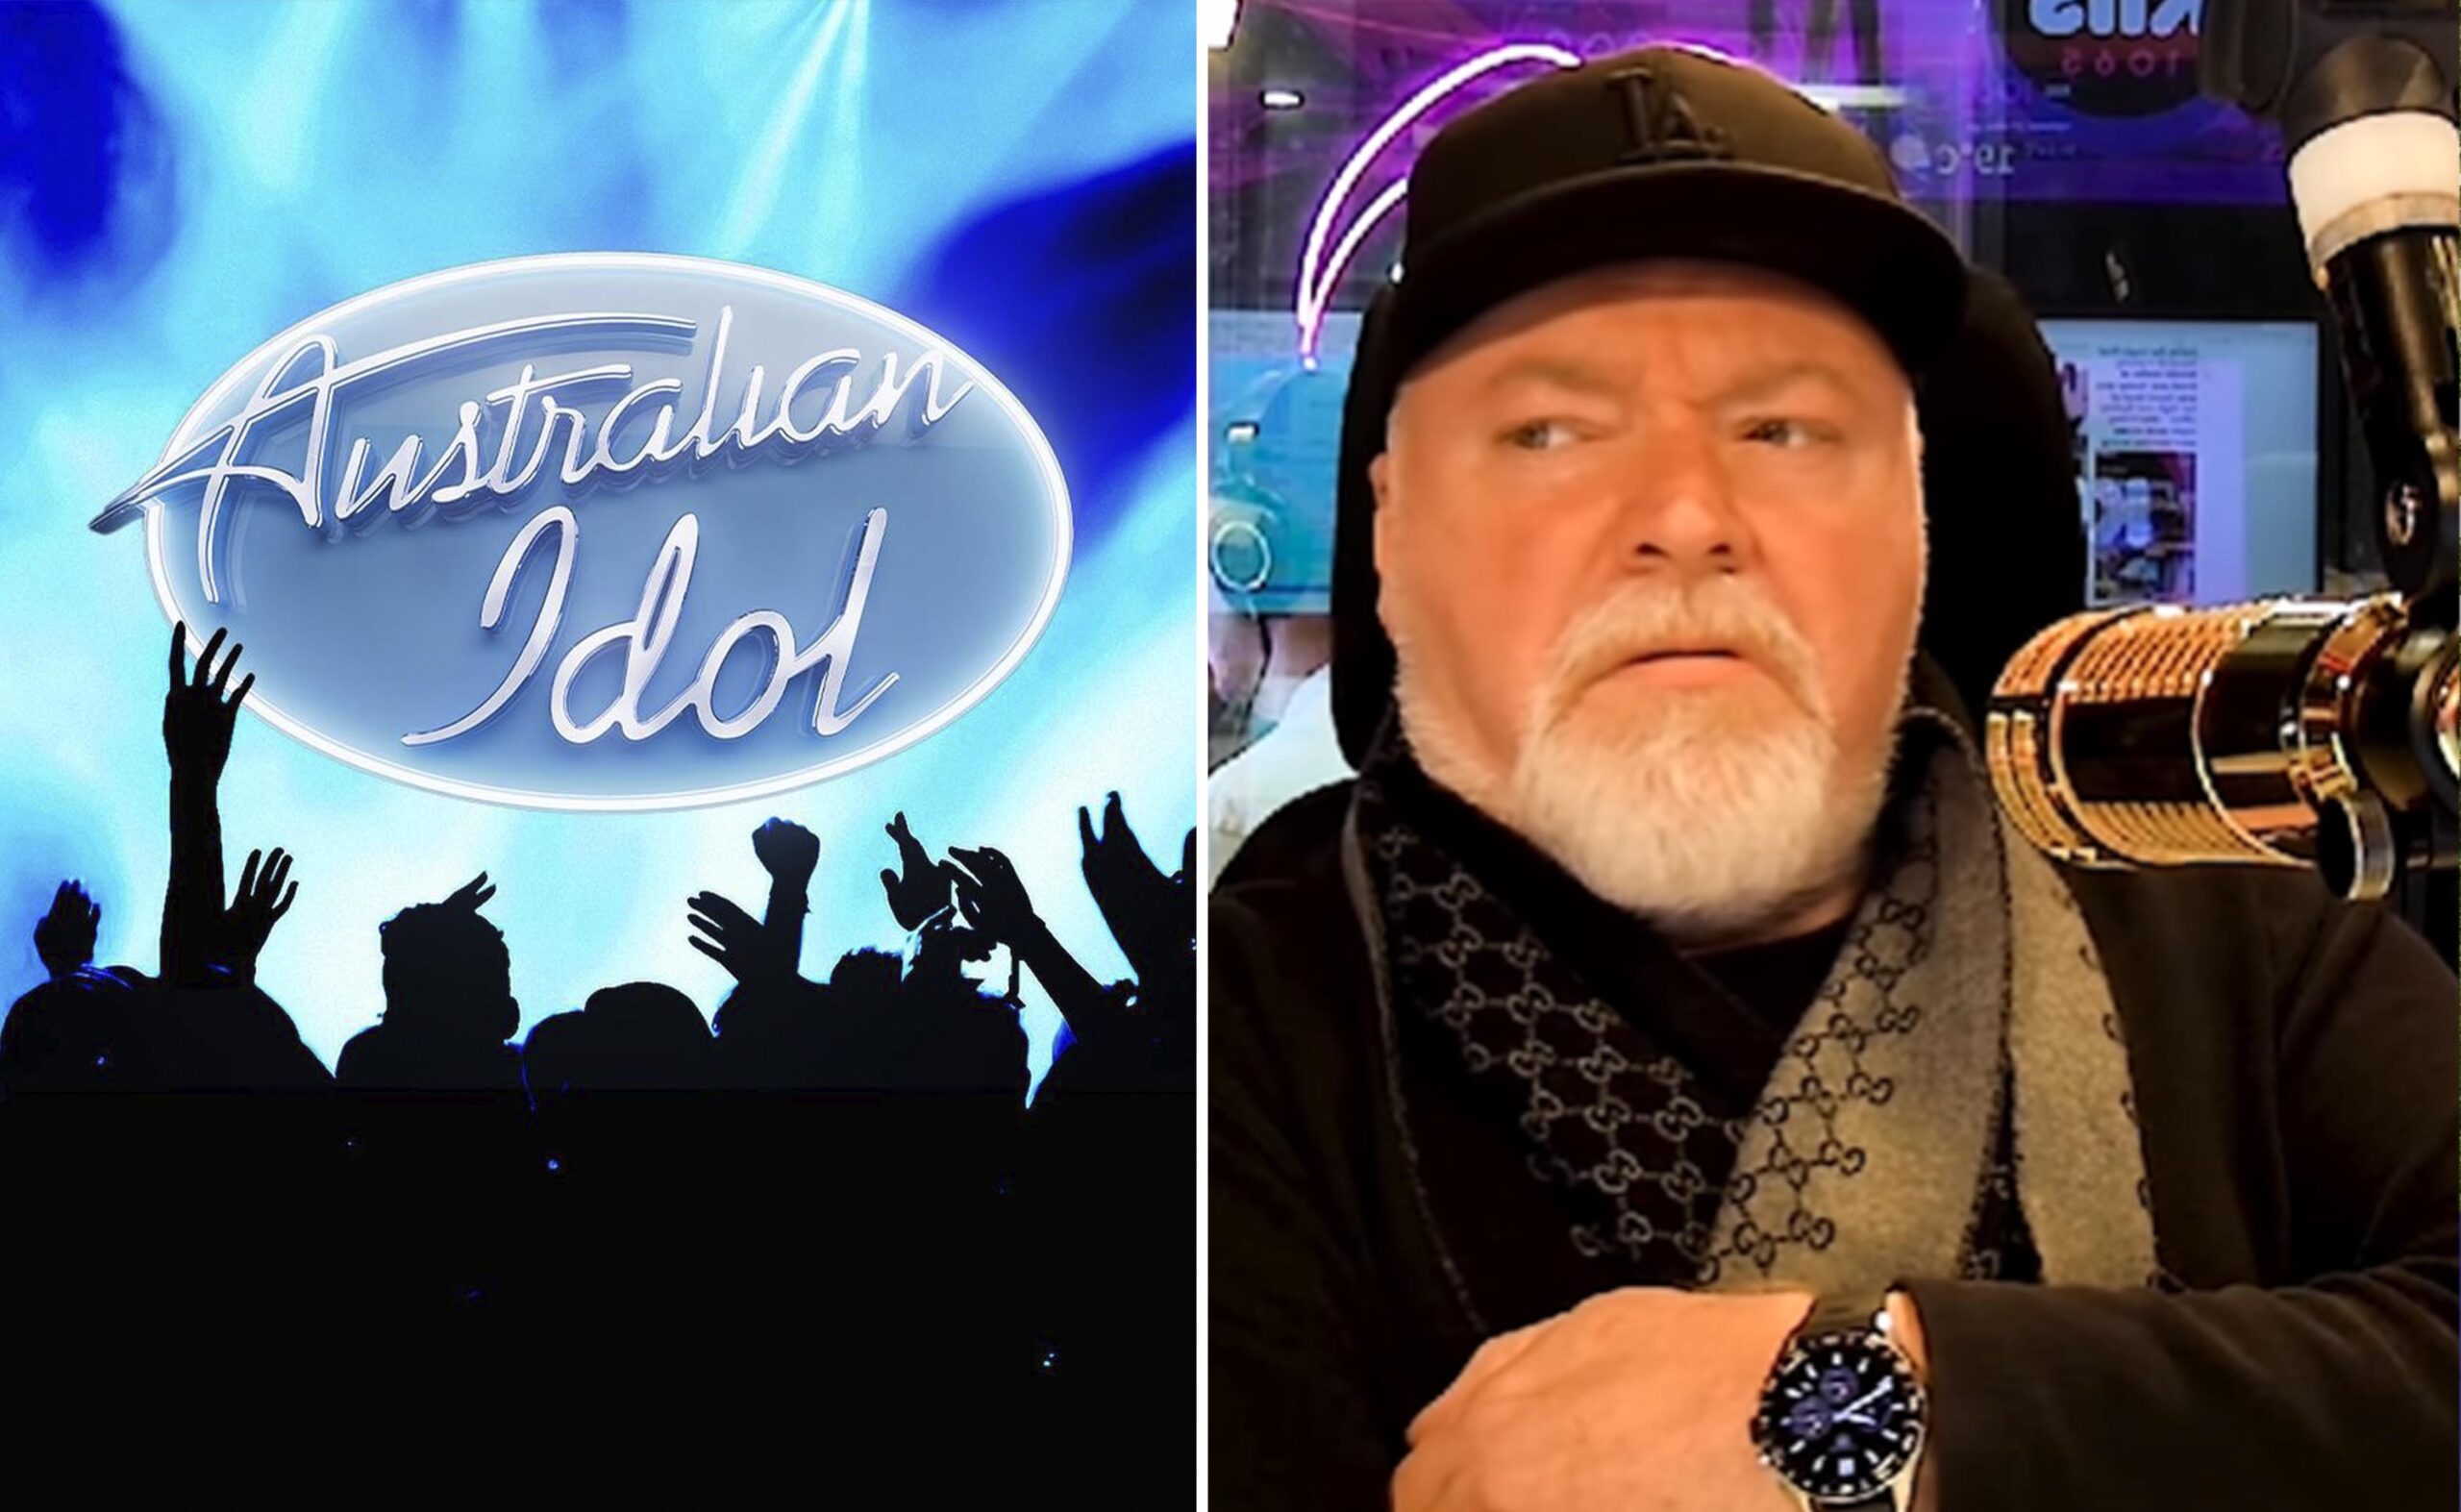 Fans threaten to boycott Australian Idol reboot over Kyle Sandilands’ return after he was sacked from the show in 2009